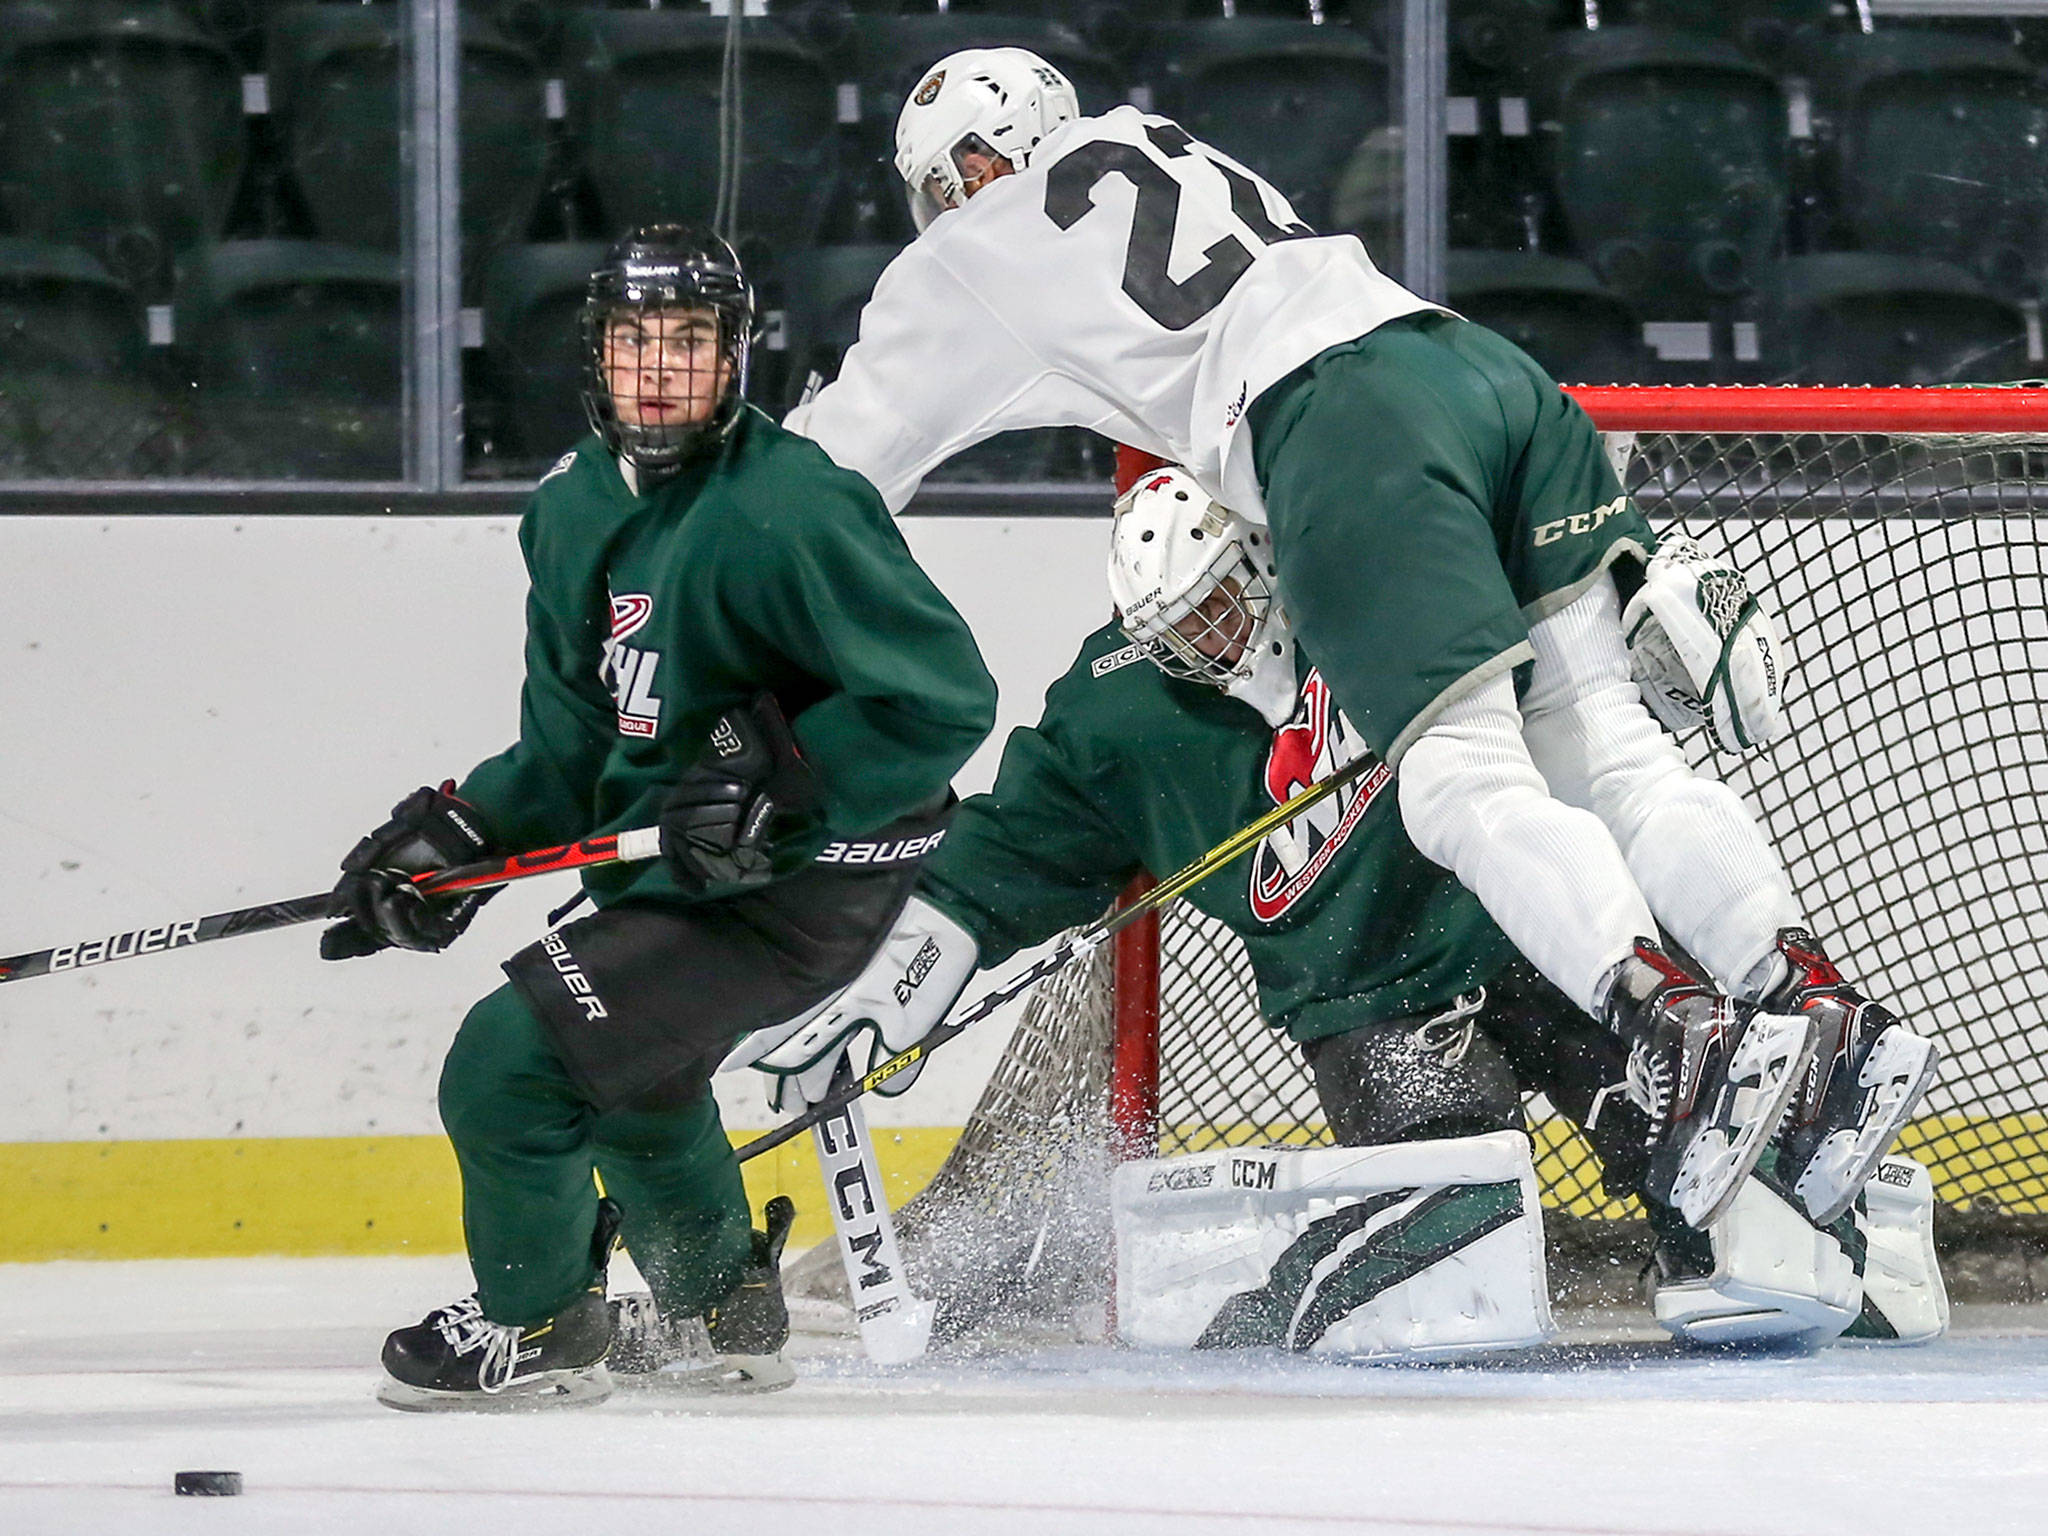 Justyn Gurney (top) crashes into goalie Evan May with Adam Bourgeois (left) looking down during Silvertips training camp on Aug. 22, 2019, at Angel of the Winds Arena in Everett. (Kevin Clark / The Herald)